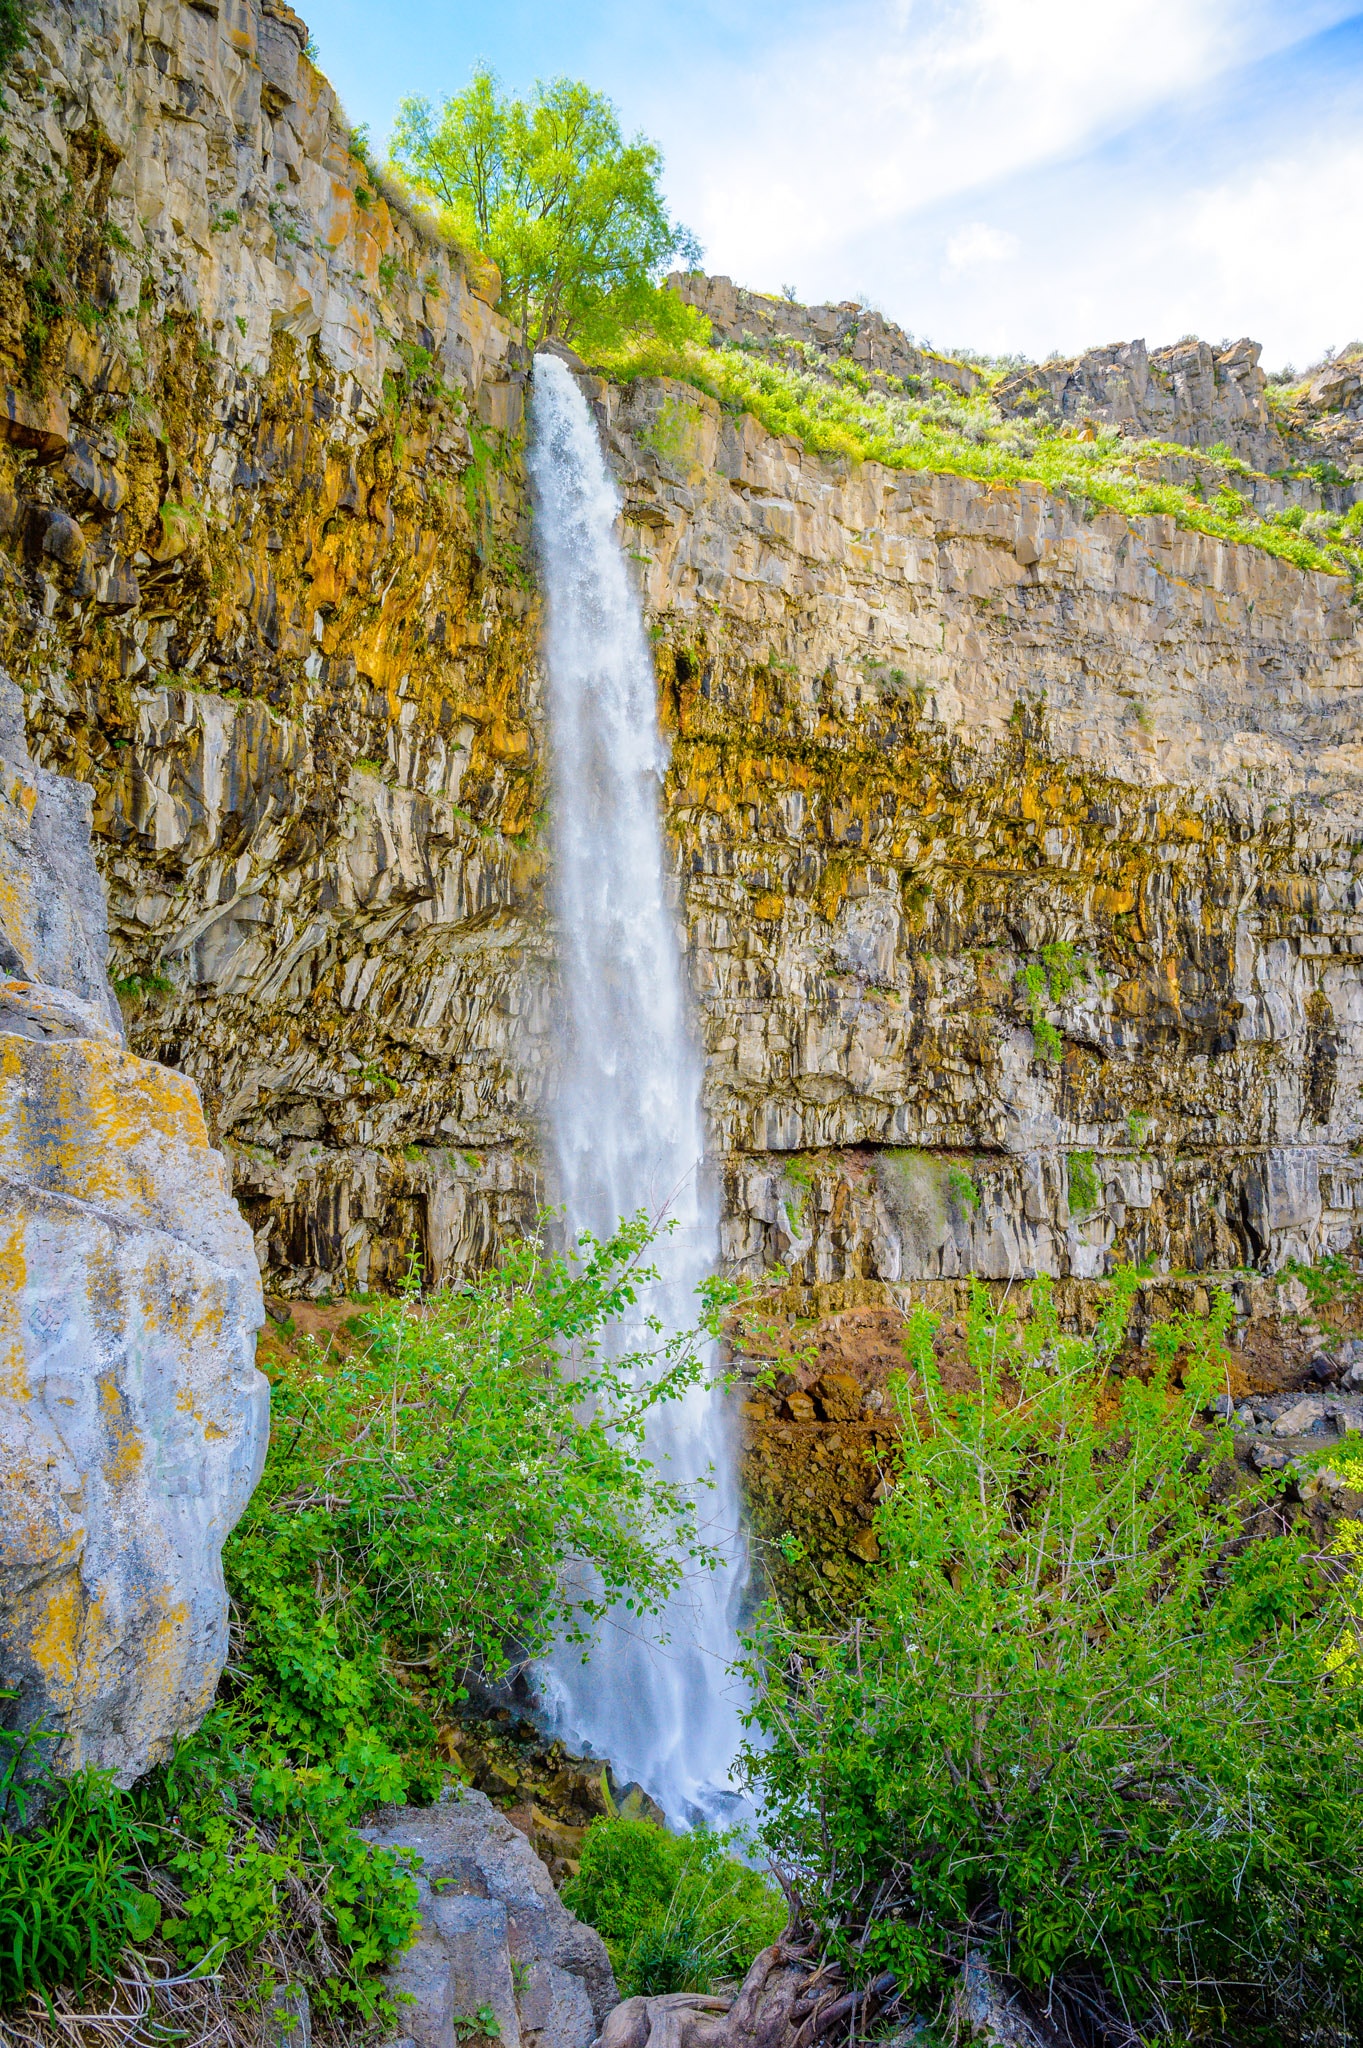 This view of Perrine Coulee Falls was taken from the road leading down to Centennial Waterfront Park in Twin Falls, Idaho. Perrine Coulee Falls is unique because its flow increases during the summer. This is due to overflow from irrigation canals farther upstream that gather in the valley, also called a coulee, and then flows downstream to the falls.